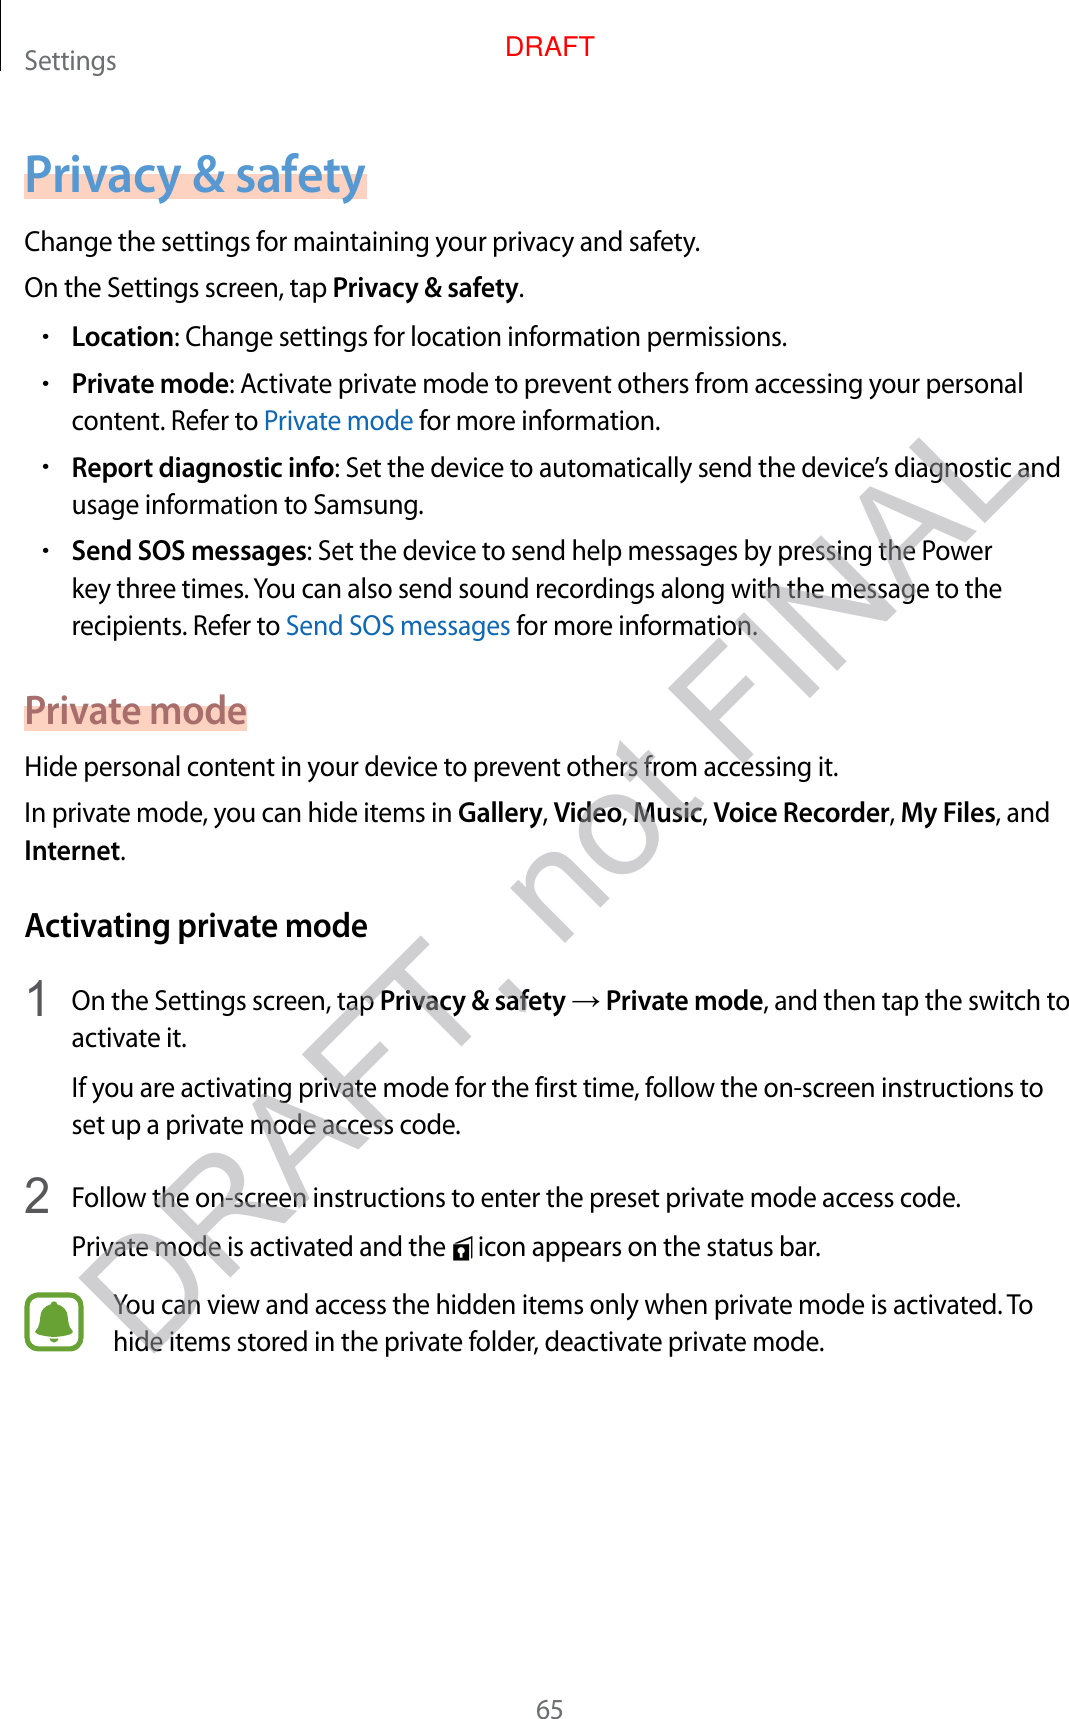 Settings65P rivacy &amp; safetyChange the settings for maintaining y our privacy and safety.On the Settings screen, tap Priv acy &amp; safety.•Location: Change settings for location information permissions.•Priv at e mode: Activate privat e mode t o pr ev ent others fr om ac cessing y our personal conten t. Ref er t o P riva te mode f or mor e information.•Report diagnostic info: Set the device to automatically send the devic e’s diagnostic and usage information t o Samsung .•Send SOS messages: Set the device to send help messages by pr essing the Power key three times . You can also send sound recordings along with the message t o the recipients . Ref er t o Send SOS messages for mor e information.Priv a te modeHide personal content in y our device t o pr ev ent others fr om ac c essing it.In private mode, y ou can hide it ems in Gallery, Video, Music, Voice Recor der, My F iles, and Internet.Activating priv at e mode1  On the Settings screen, tap Priv acy &amp; safety → Priv at e mode, and then tap the switch to activate it.If you are activating private mode for the first time, follo w the on-scr een instructions to set up a private mode acc ess c ode .2  Follow the on-screen instructions to enter the pr eset privat e mode ac cess c ode .Priva te mode is activated and the   icon appears on the status bar.You can view and access the hidden items only when private mode is activated . To hide items stor ed in the privat e f older, deactivate private mode .DRAFT, not FINALDRAFT